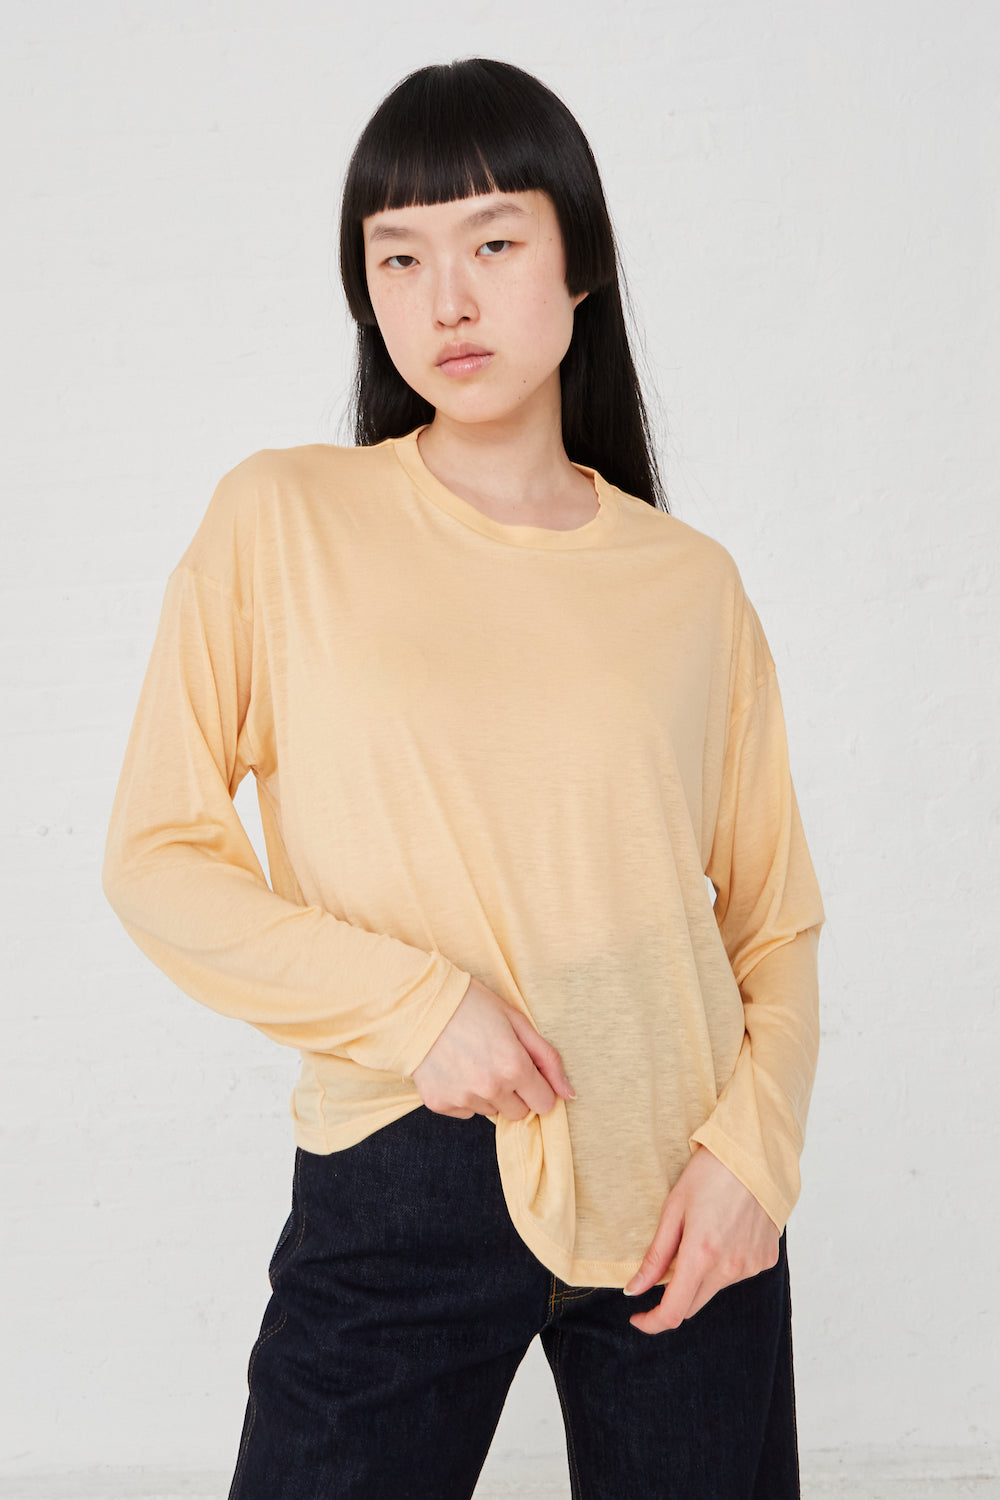 Baserange - Loose Long Sleeve Tee in Daf Yellow full front view on model.